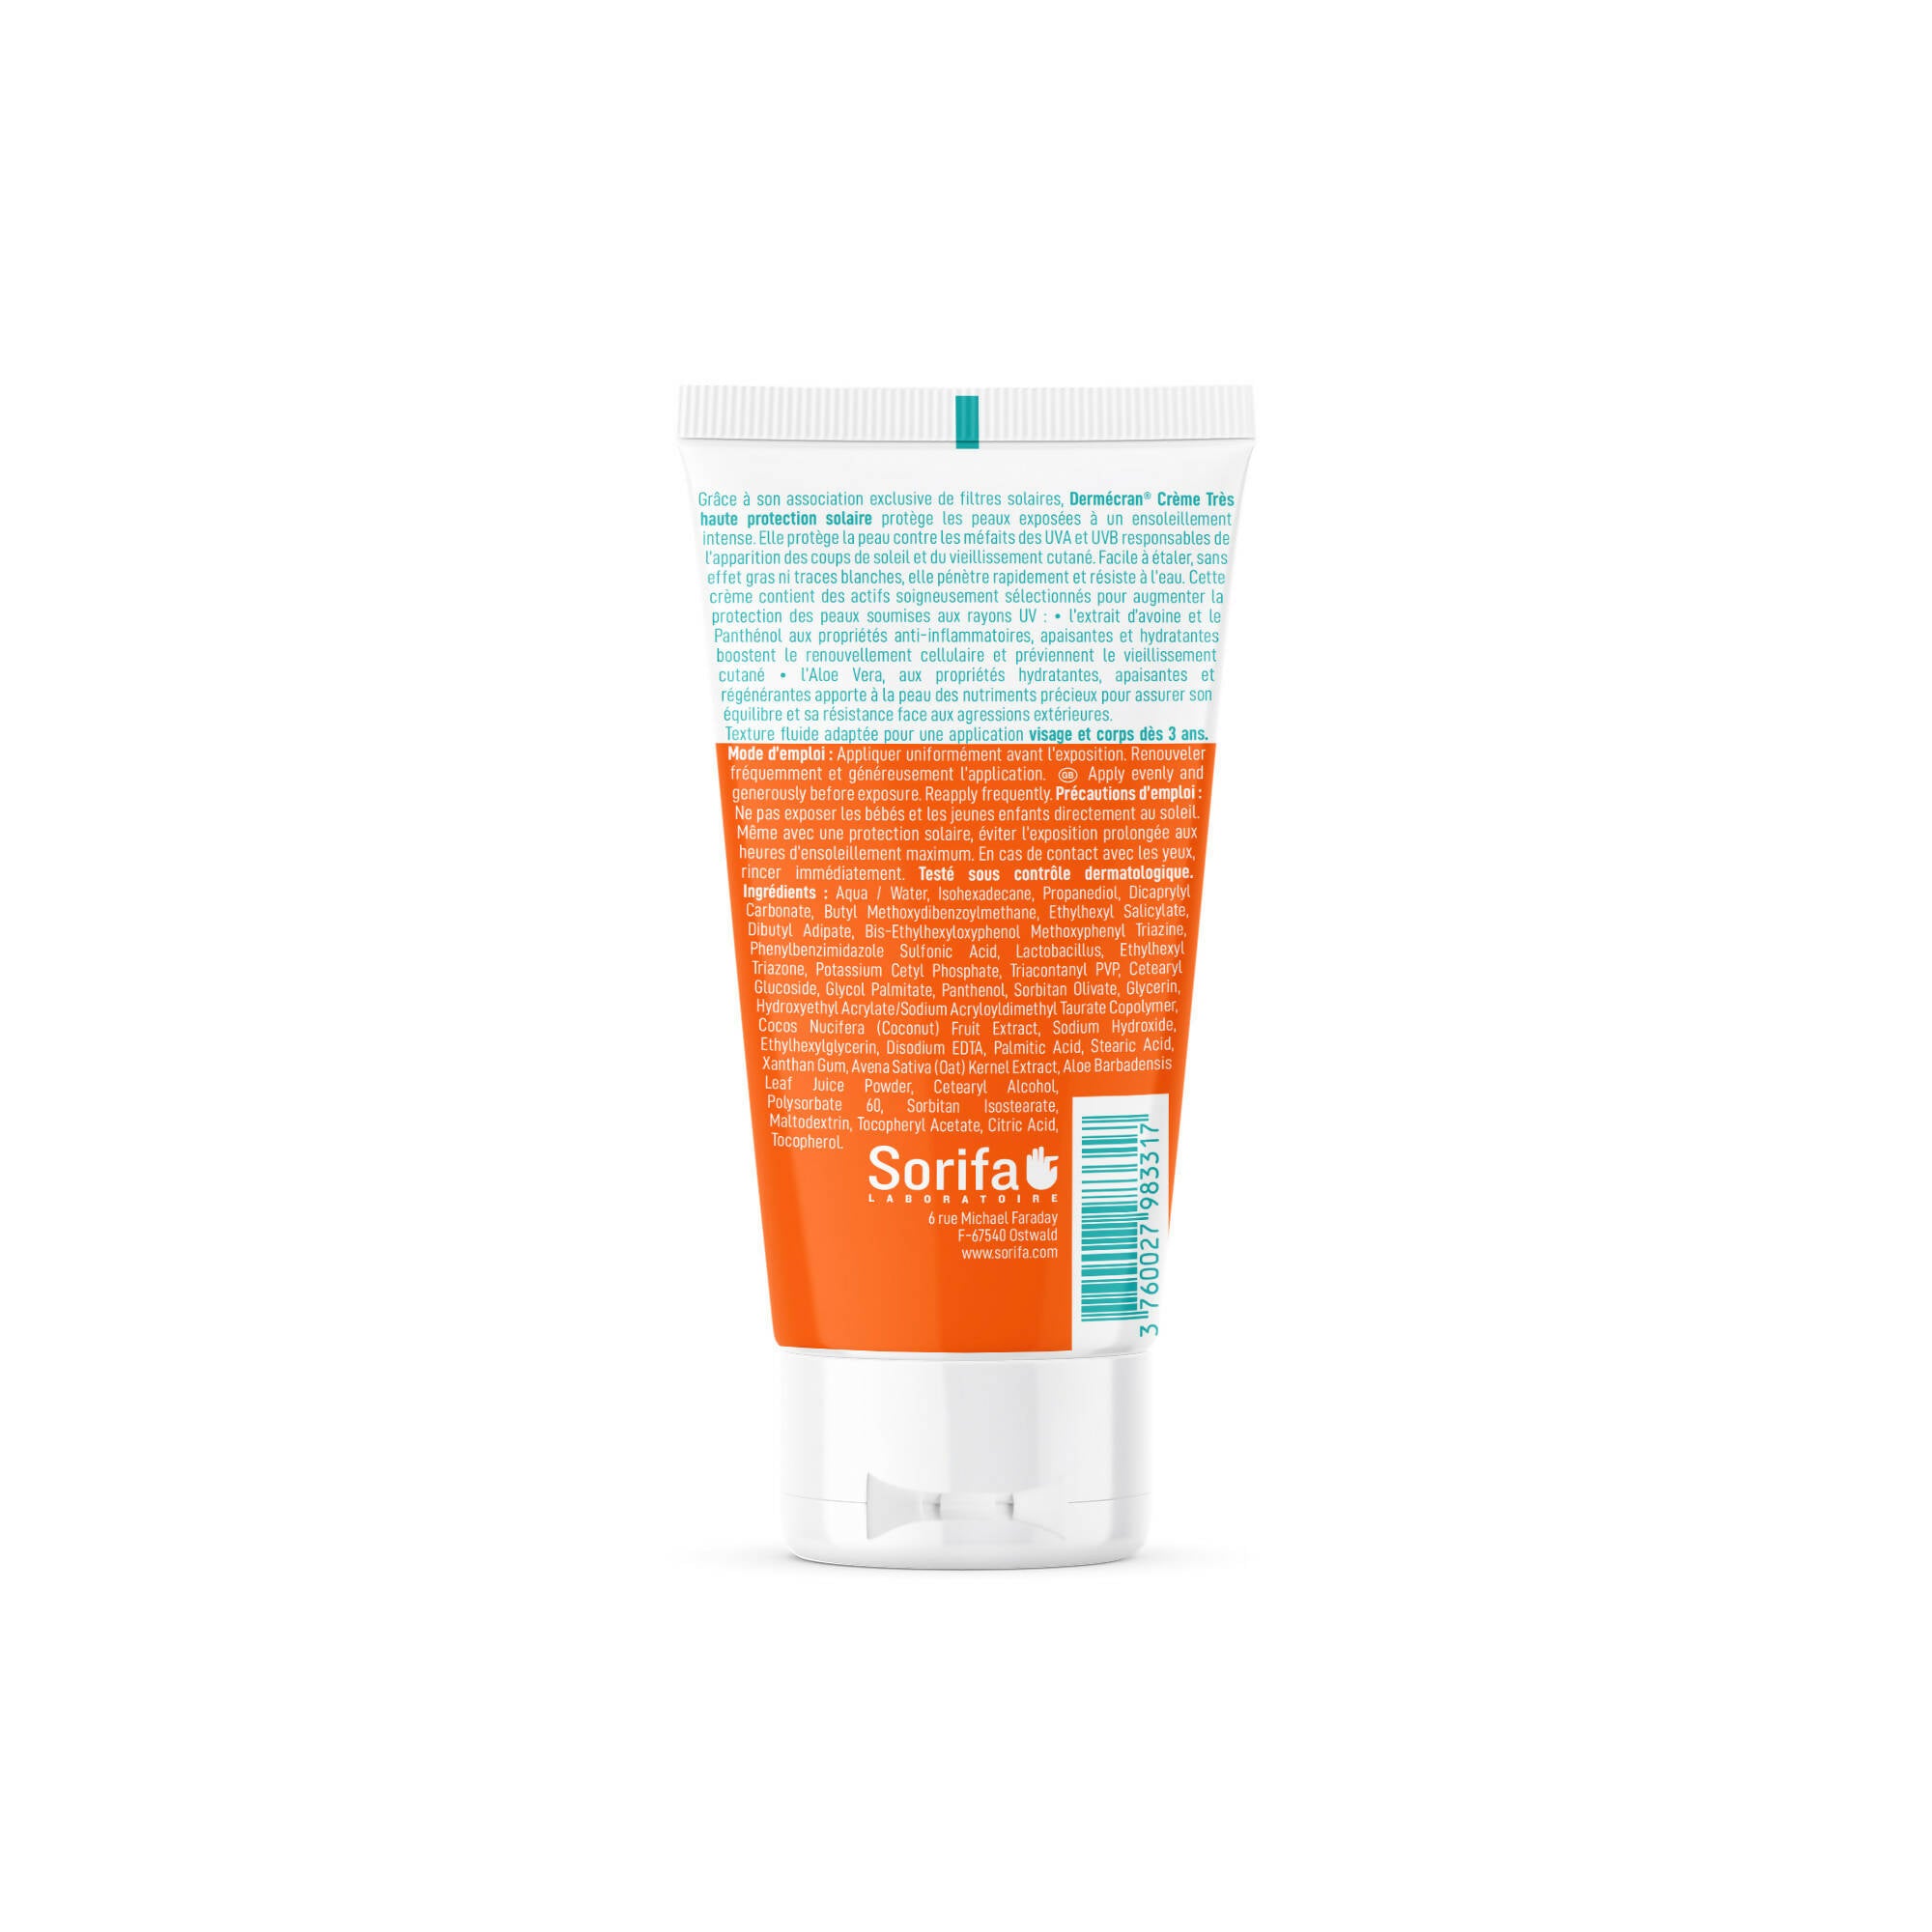 SORIFA - Dermscreen - SPF50+ sun cream - Face and body - Vegan &amp; Ocean Friendly formula - Water resistant - For the whole family from 3 years old - Made in France - 50 ml tube - 0